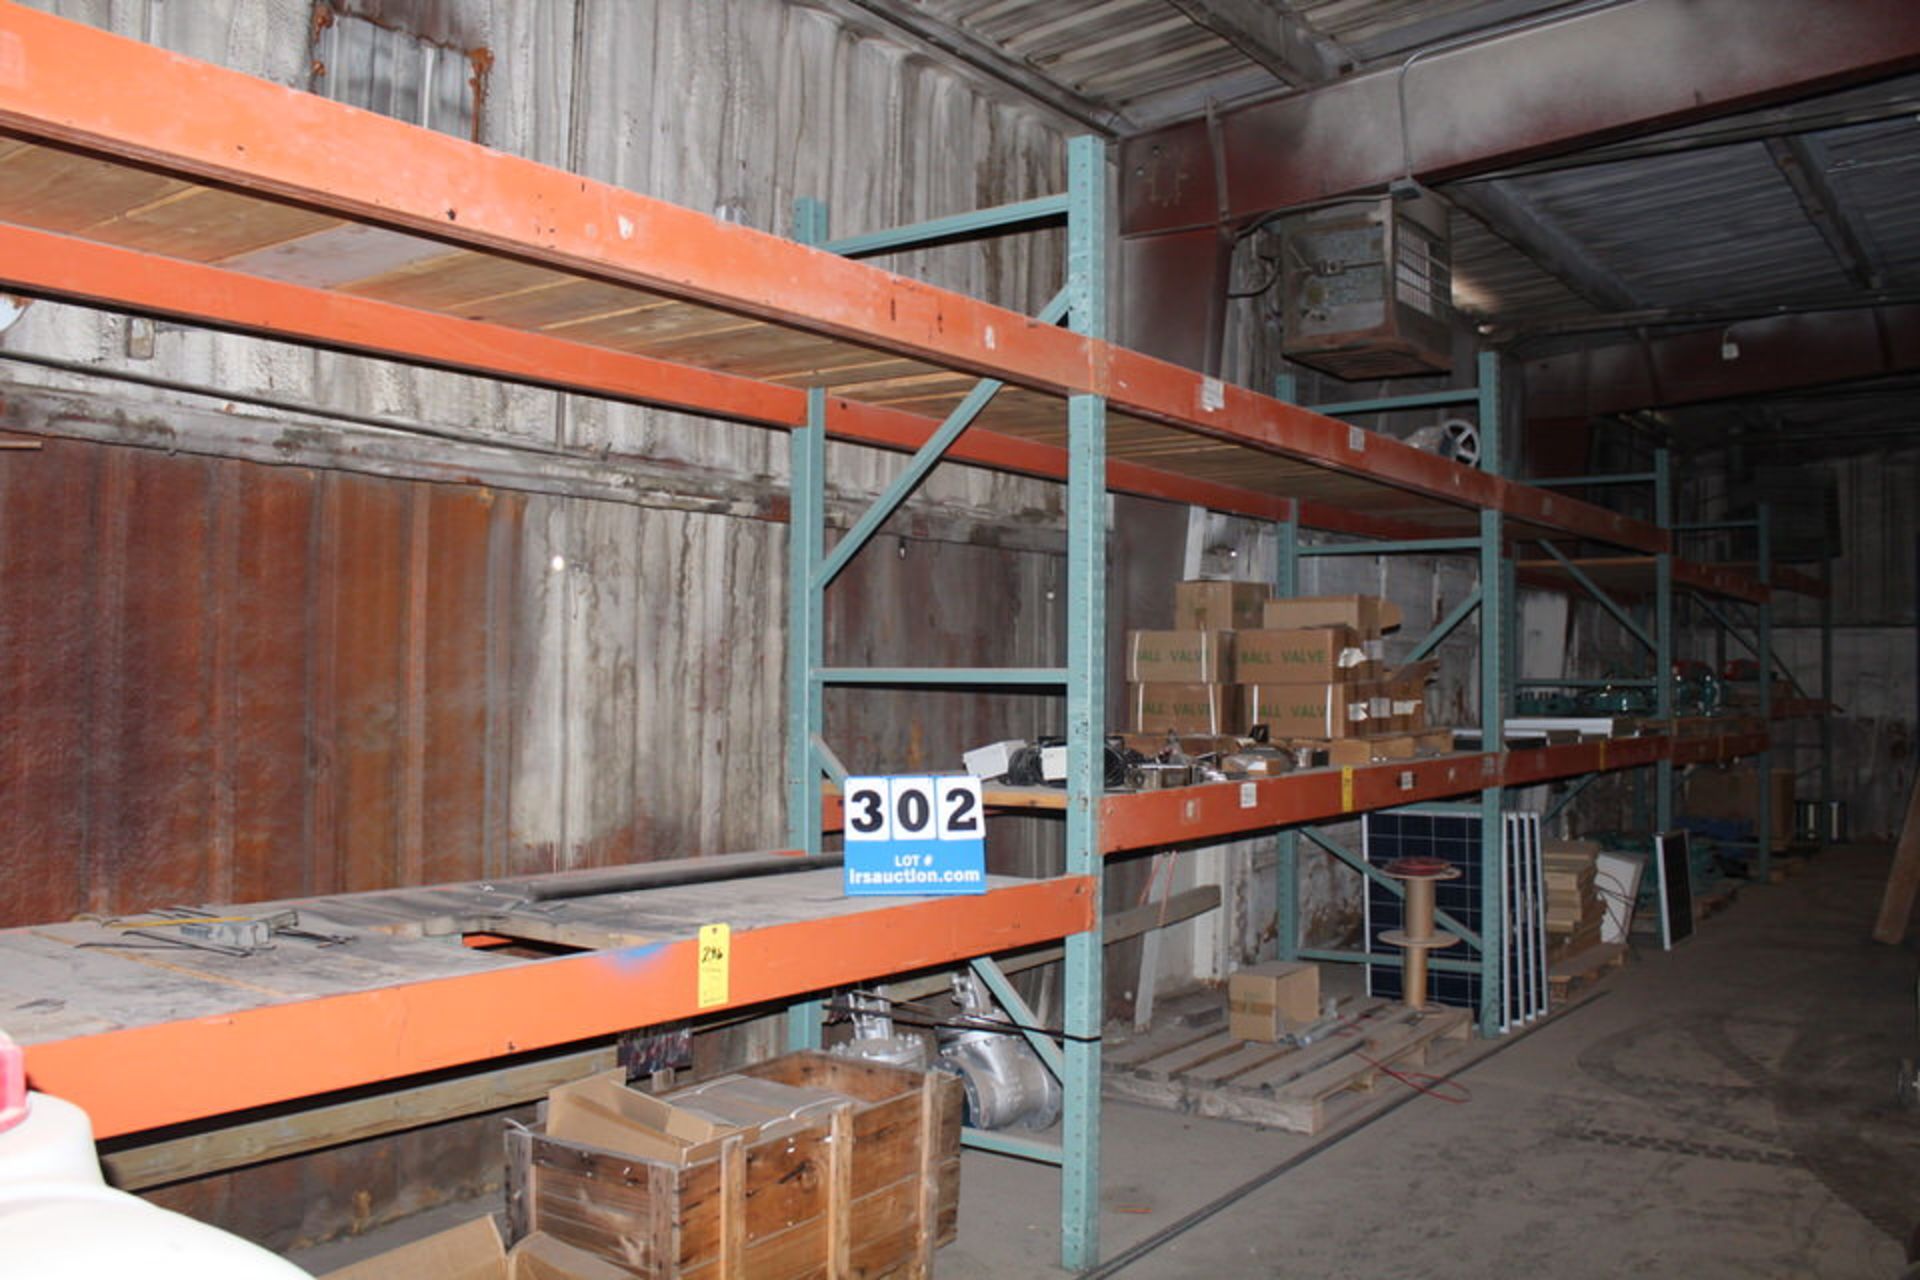 10 SEC PALLET RACKING, 10' X 4 4" UPRIGHTS, 9' CROSSBEAMS, *3 DAY DELAY REMOVAL ** Located: 1700